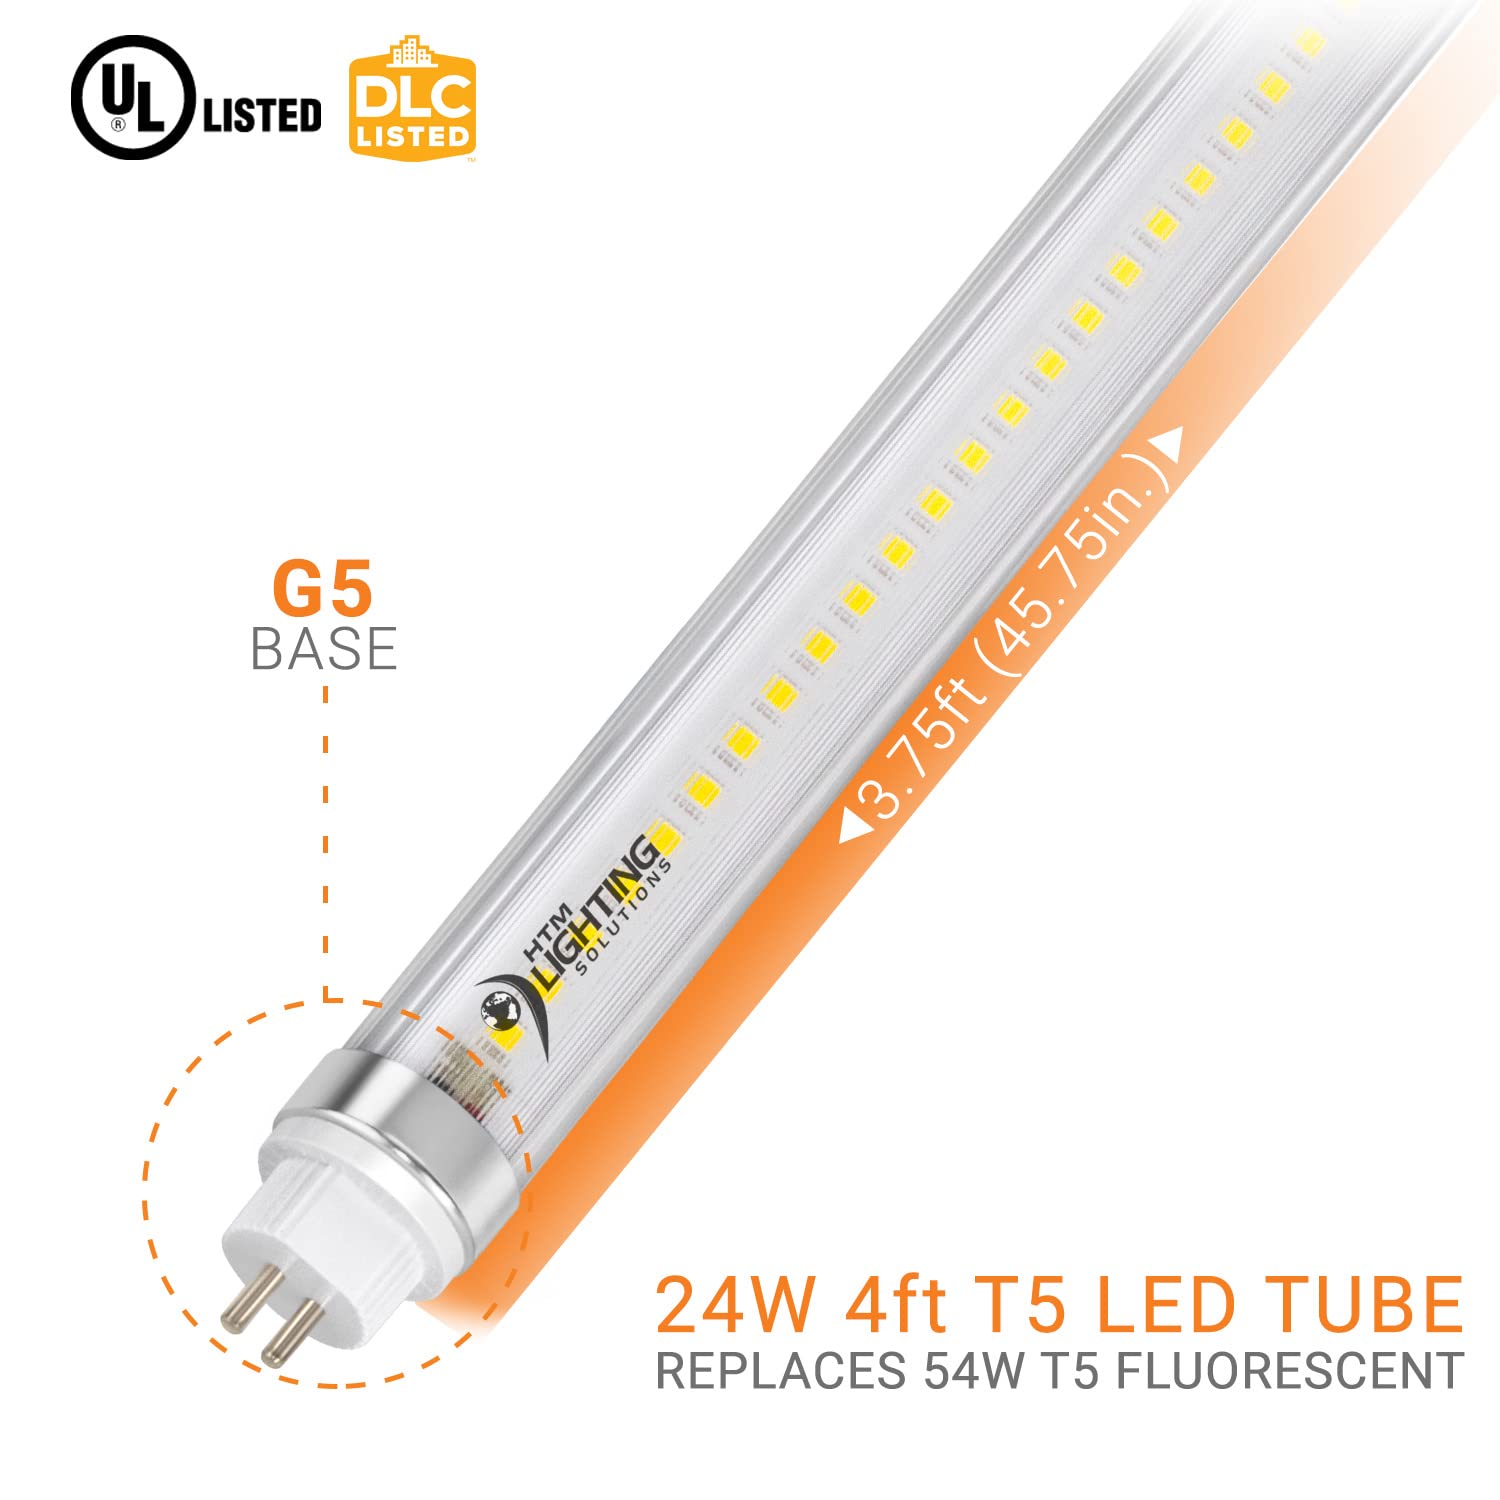 4ft 24W T5 High Output LED Tube Light, 45.75", F54T5 Equal, 5000K (Cool White), Clear Lens, 3500 lm, G5 Mini Base, 100-277V, Ballast Bypass, Dual-End Powered, LED Shop Light, UL-Listed (4-Pack)